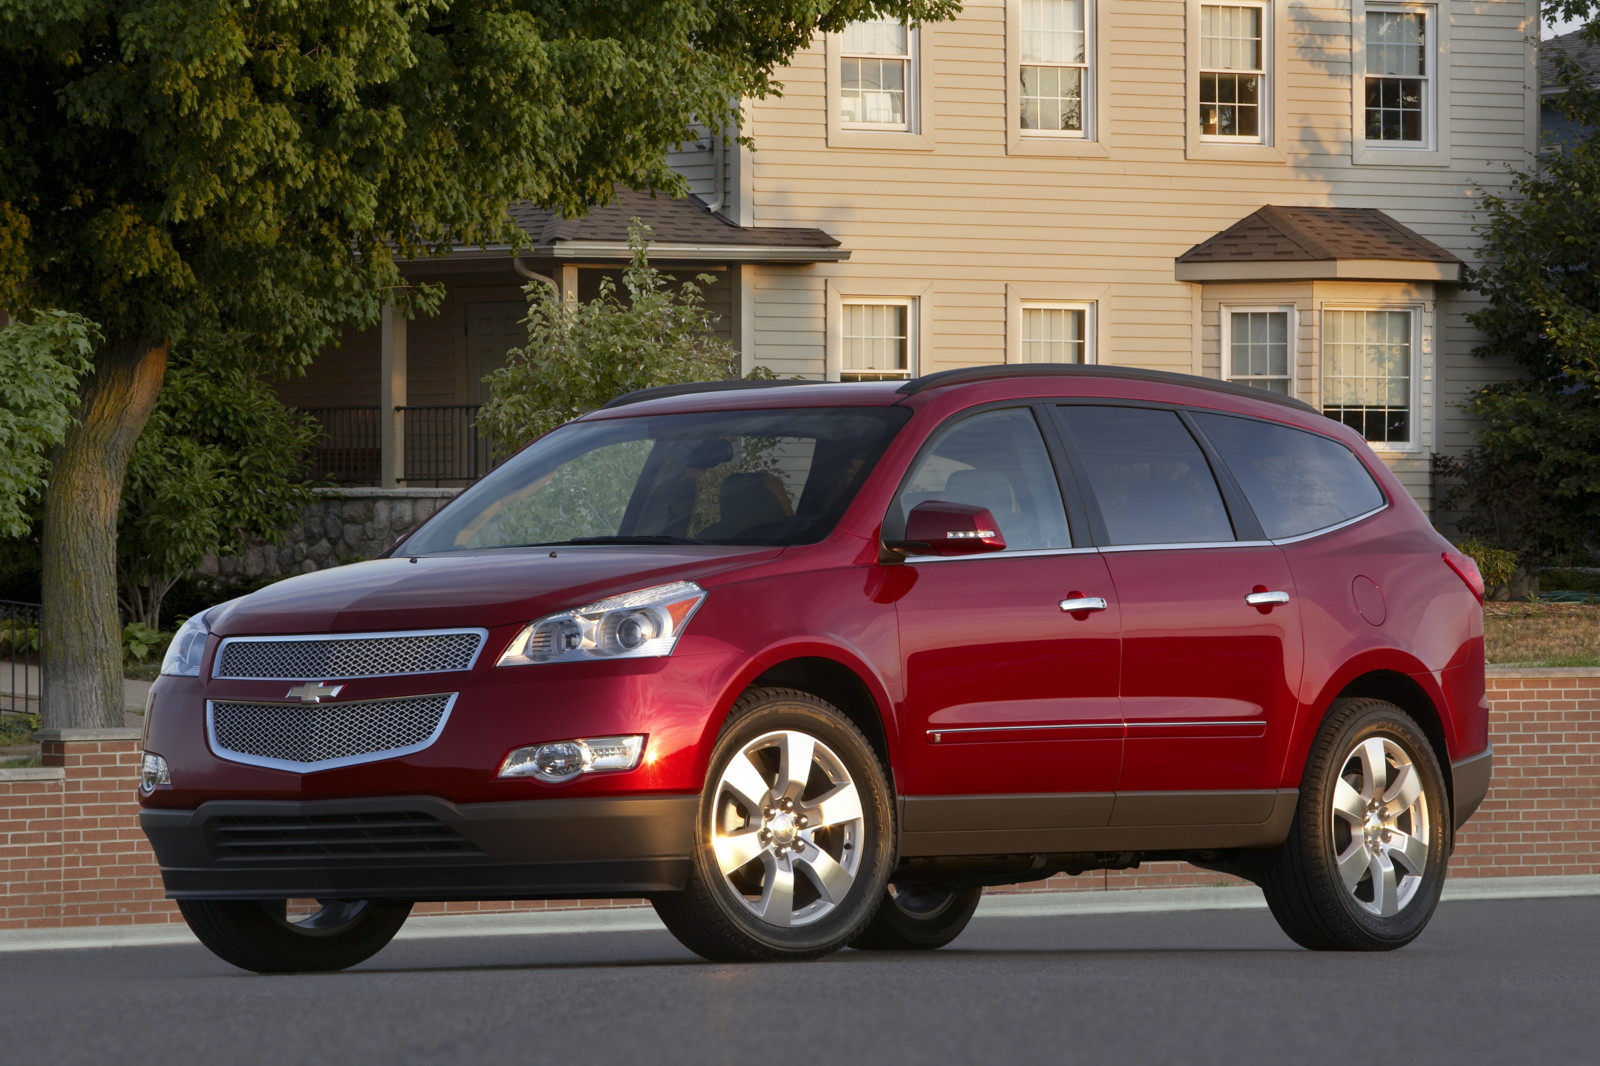 2010 Chevrolet Traverse (Chevy) Review, Ratings, Specs, Prices, and Photos  - The Car Connection